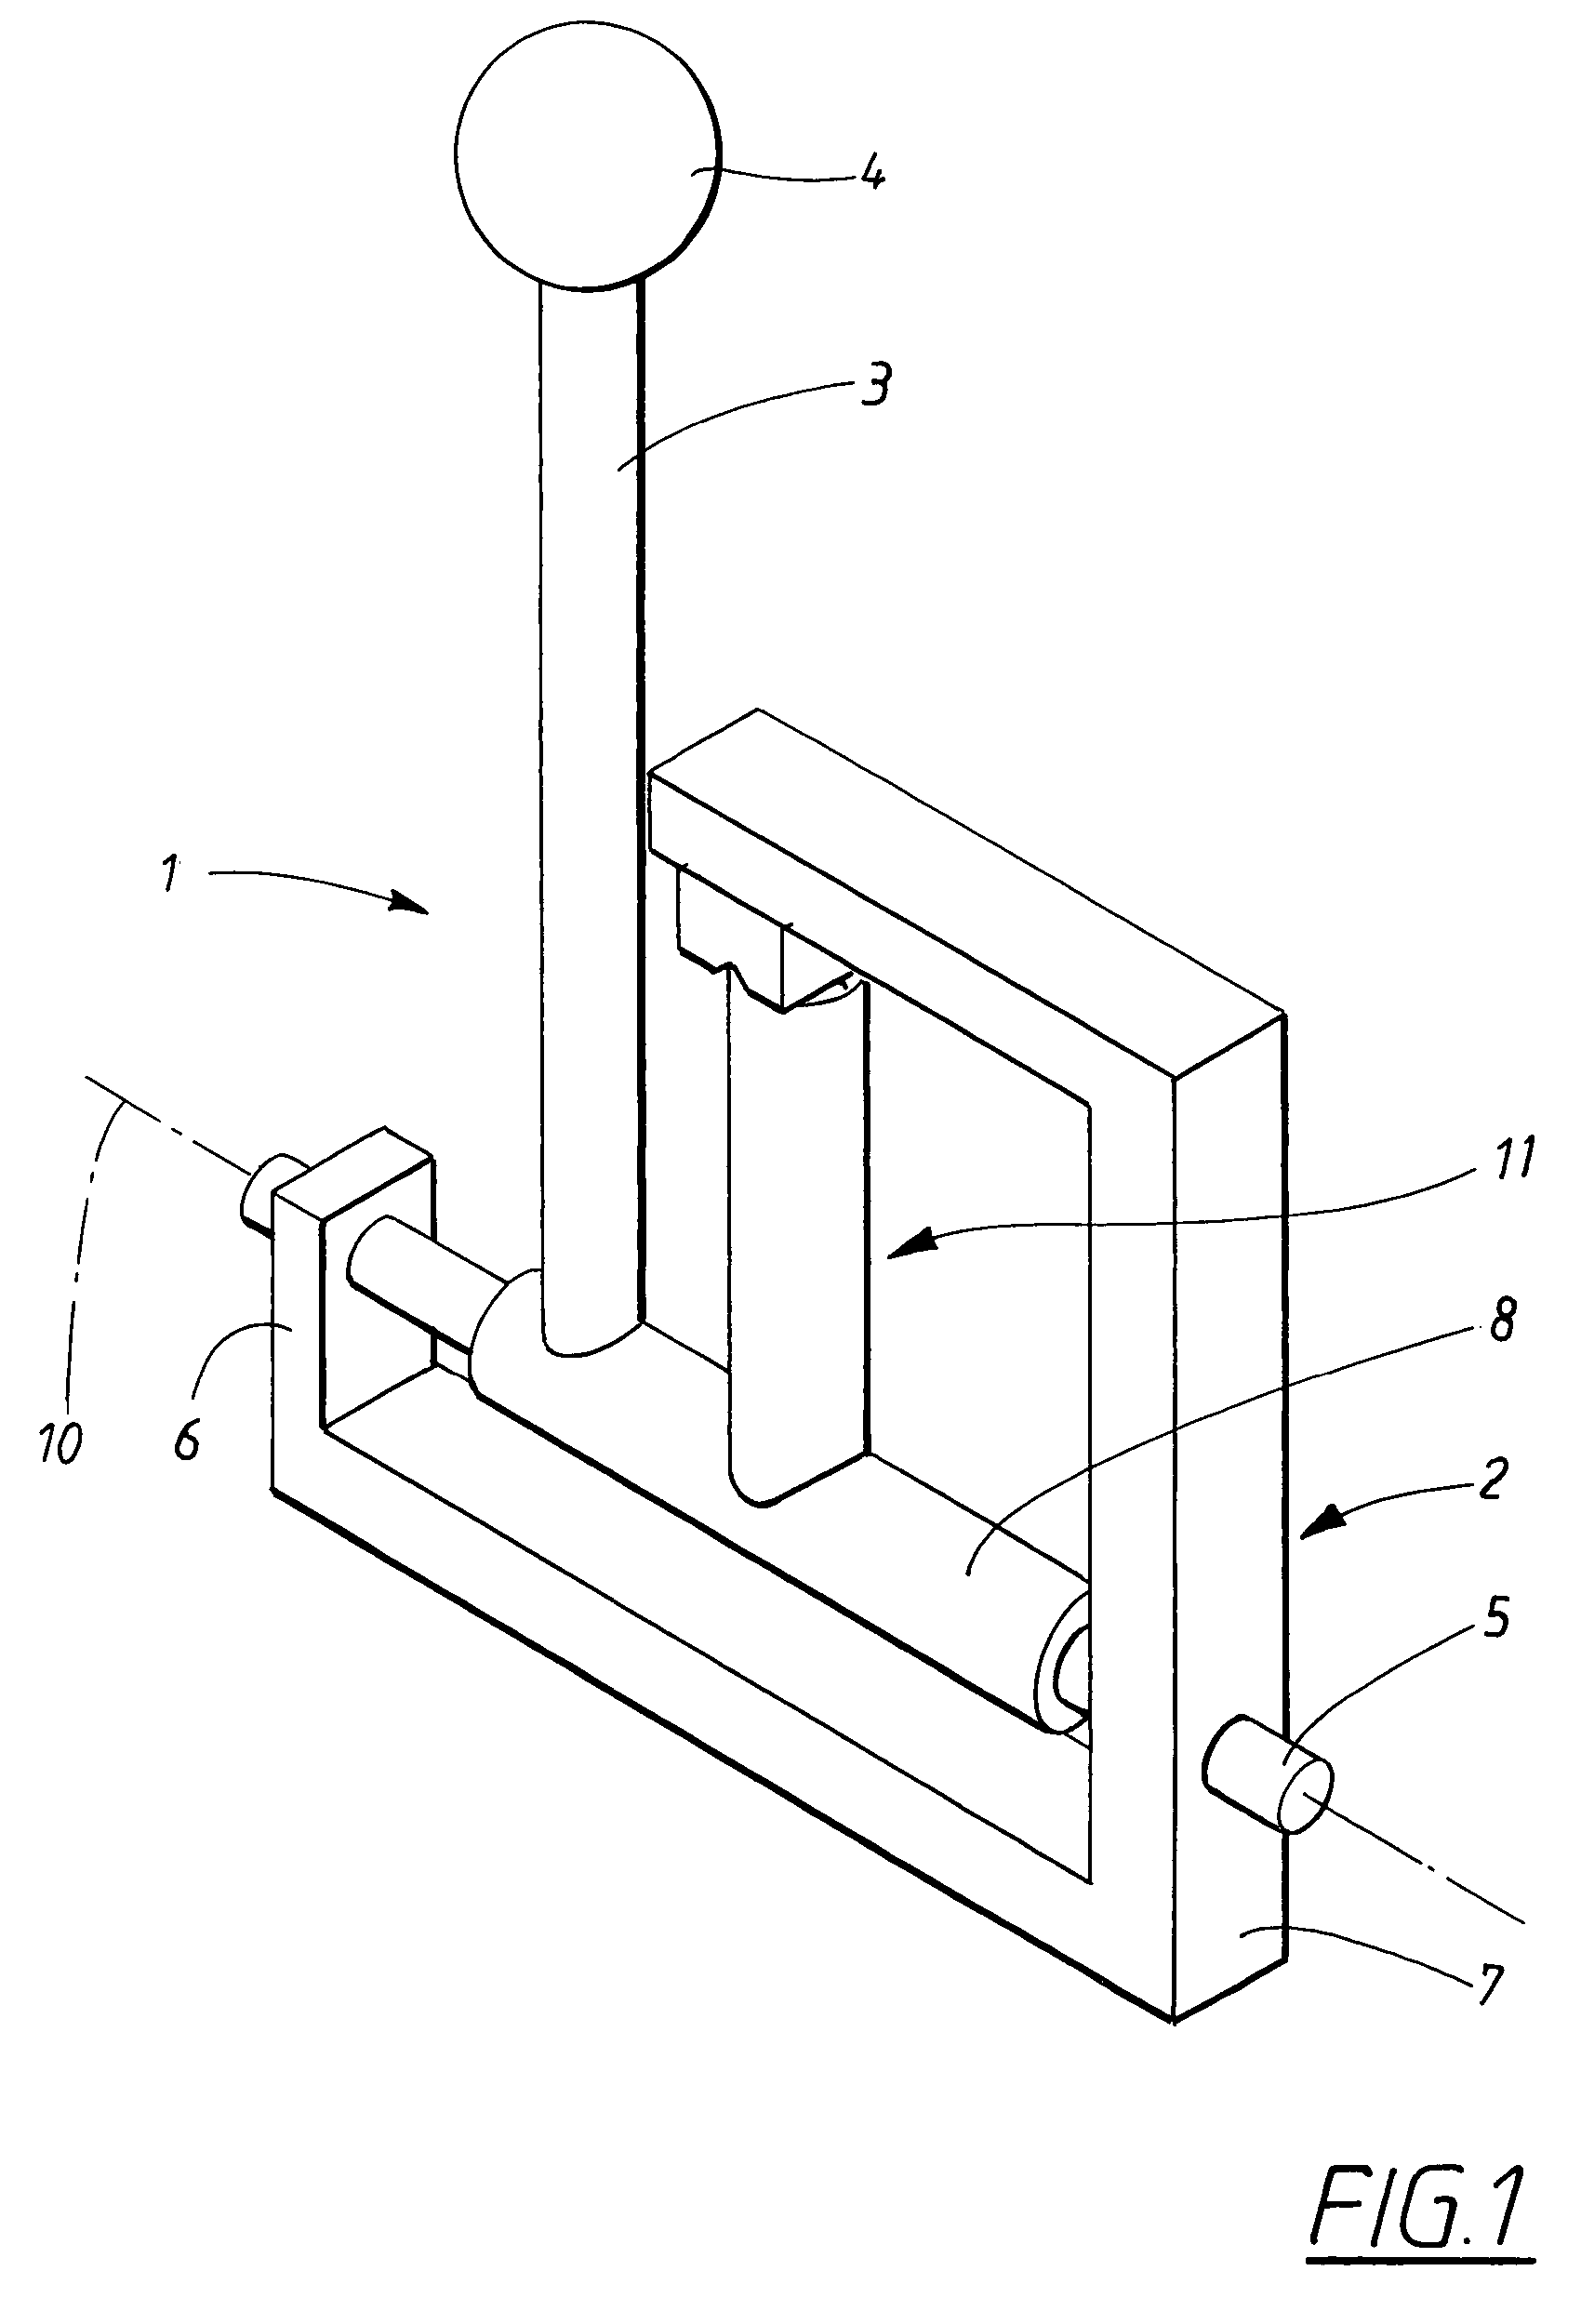 Centering device for longitudinal elements and a resetting device for motor vehicles